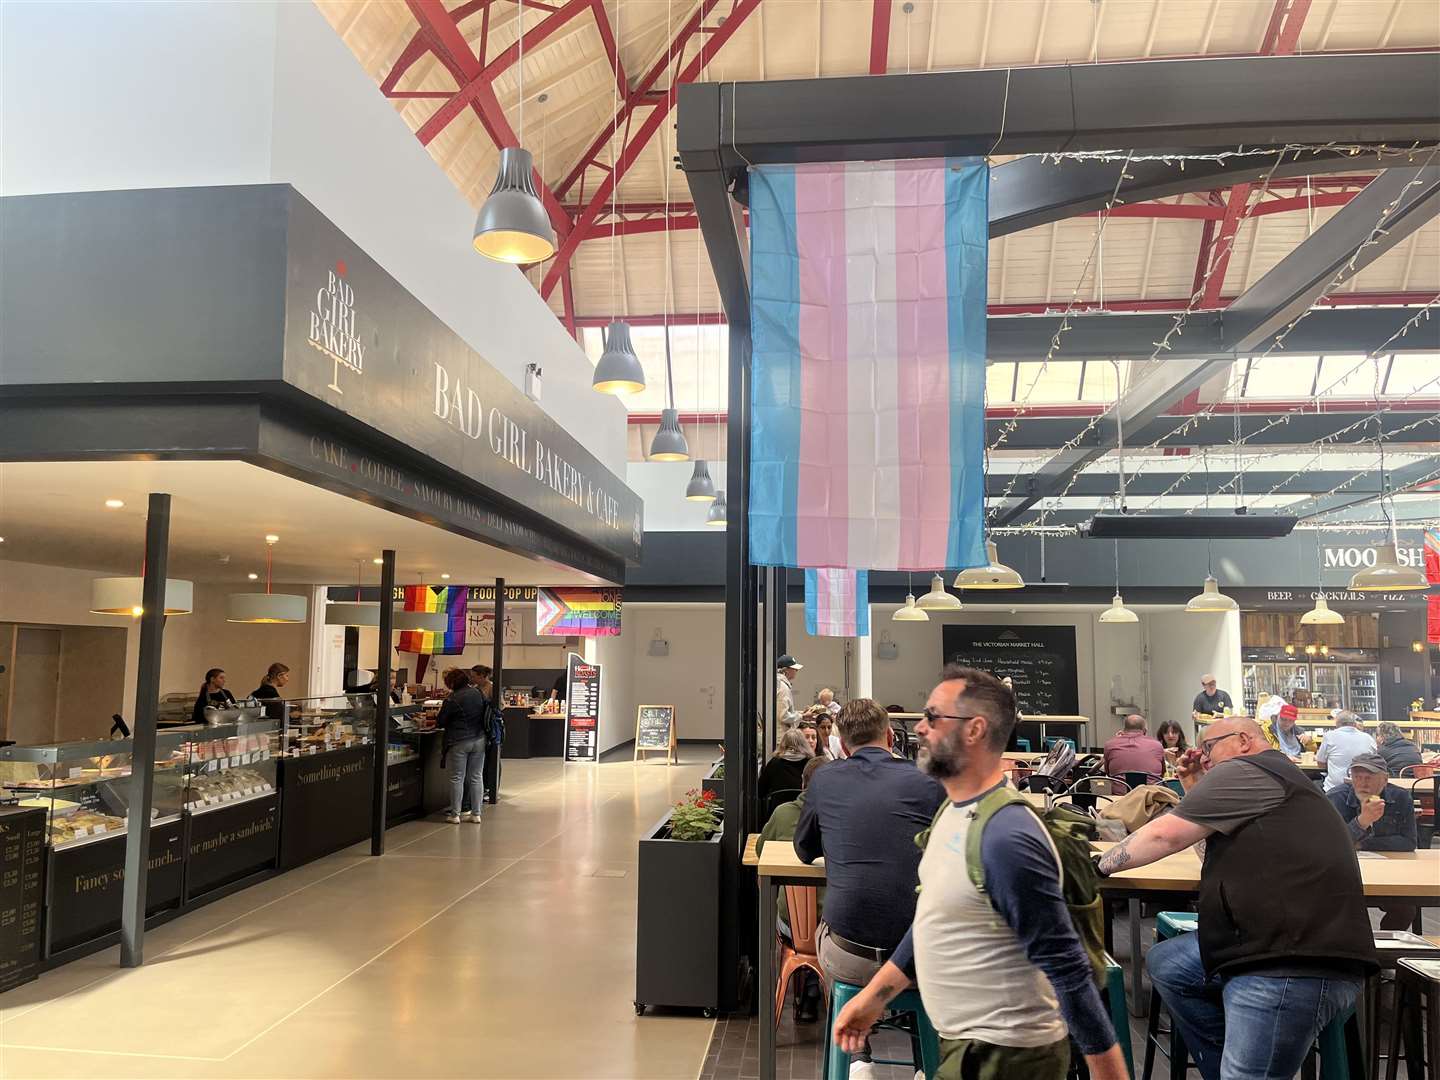 A trans flag was flown at the Victorian Market during Pride month back in June. Picture: Stephen Doyle